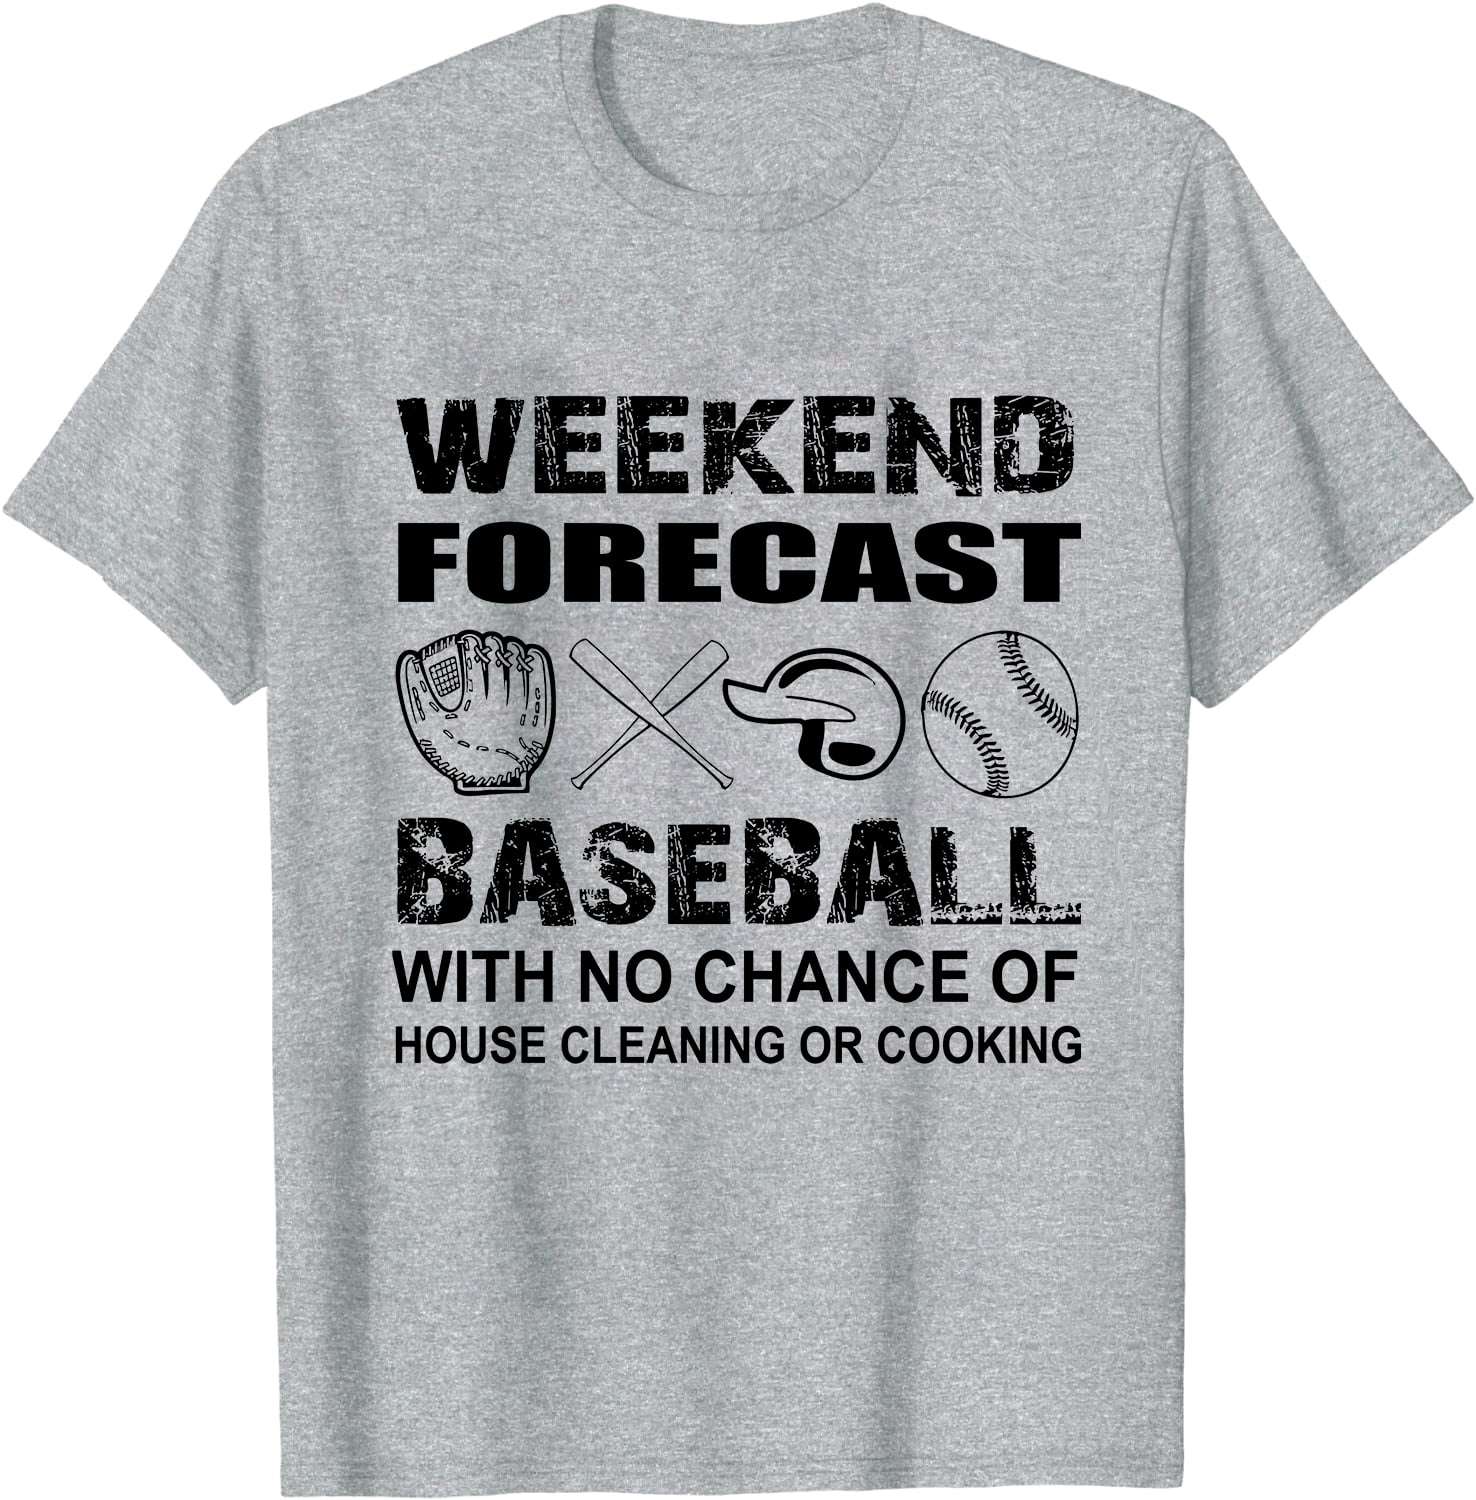 Weekend forecast - Baseball with no chance of house cleaning or cooking, play baseball at weekend